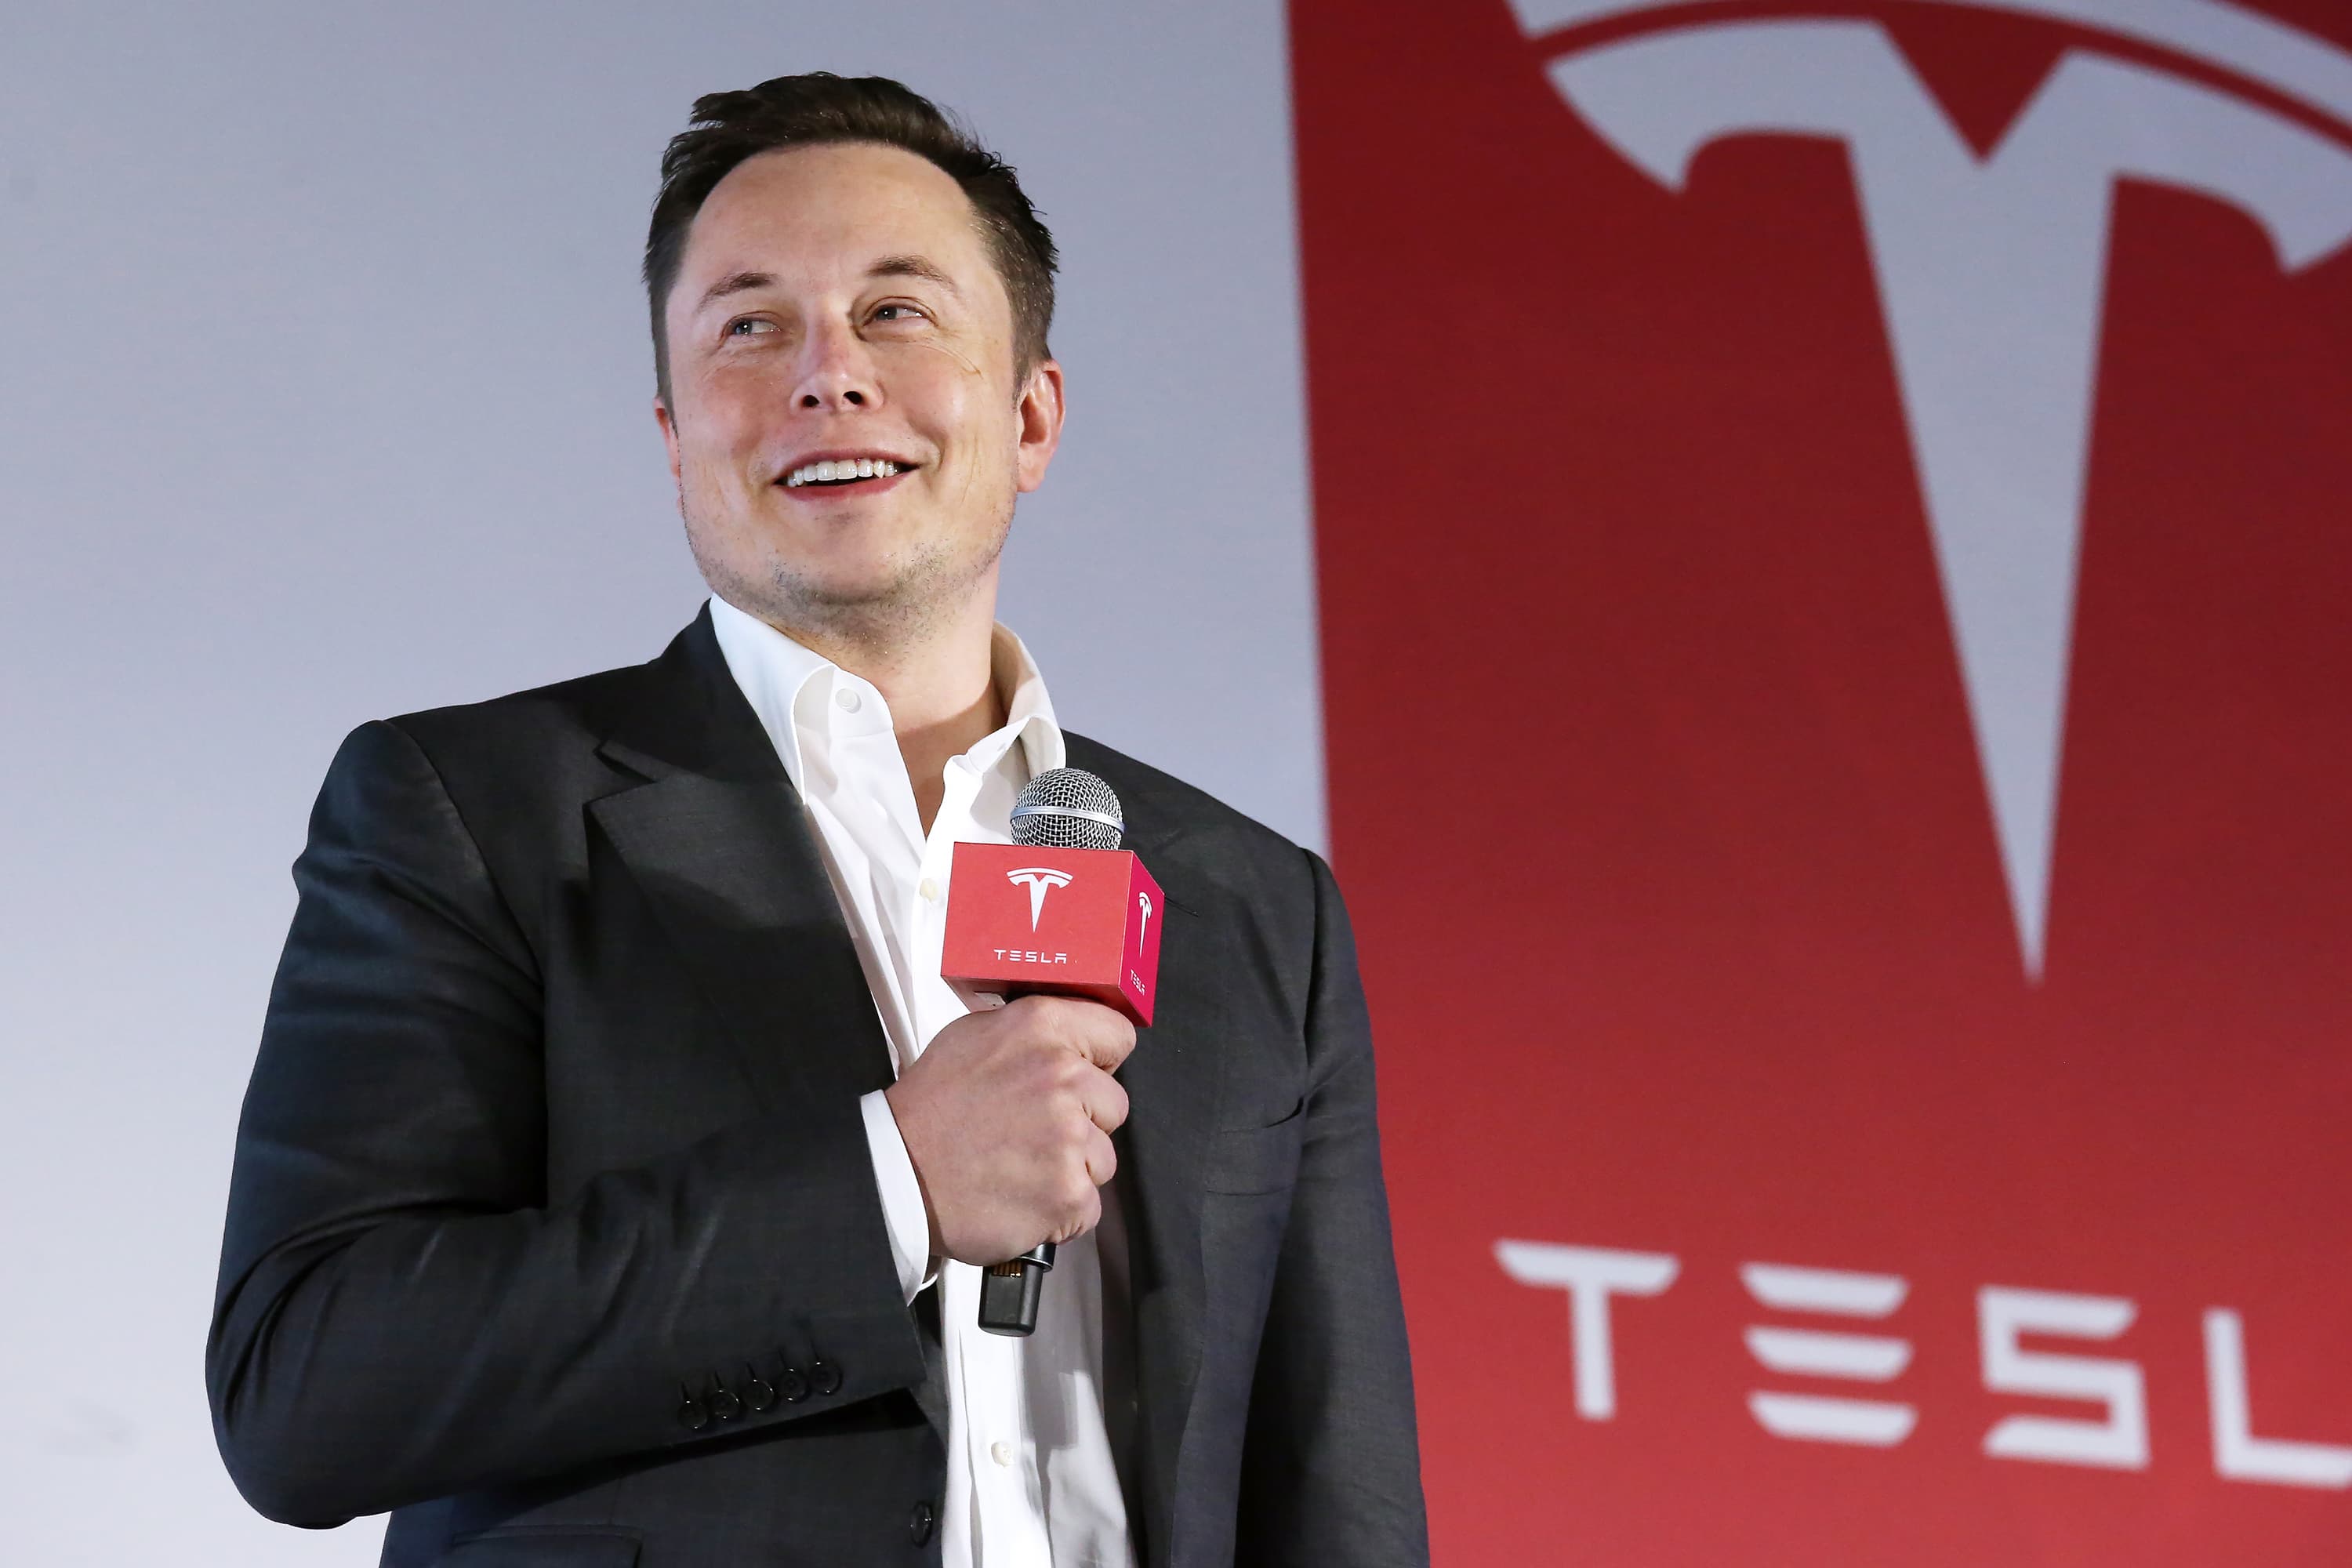 If Tesla's cars are spied in China or elsewhere, the company will shut down, says Elon Musk